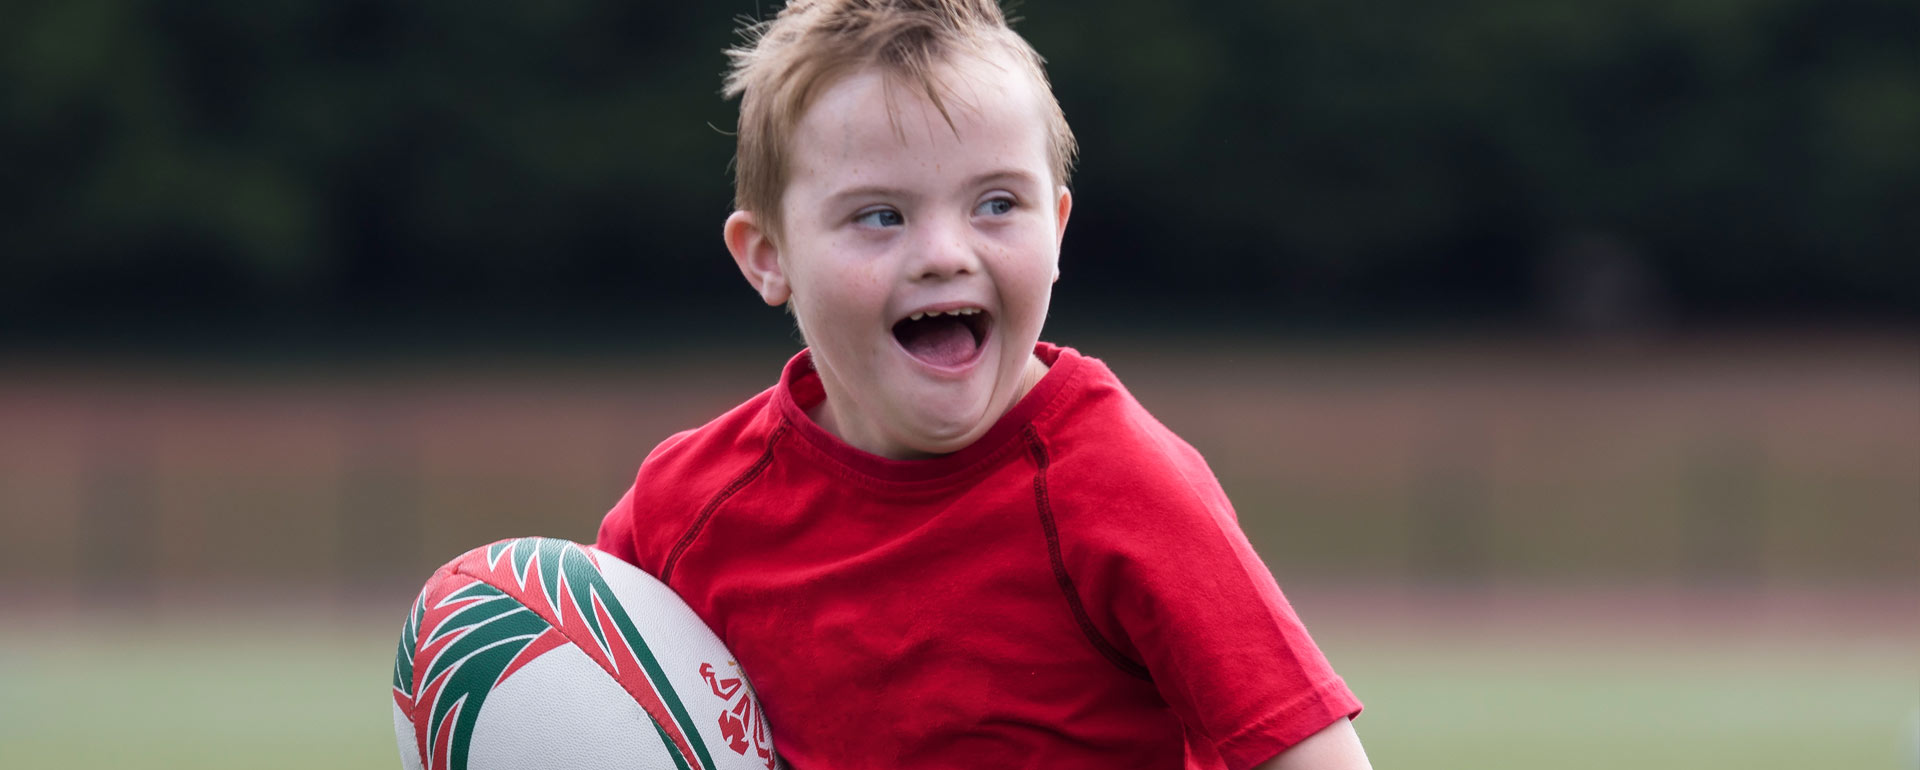 A young boy with Down's syndrome is playing running rugby and is smiling broadly.